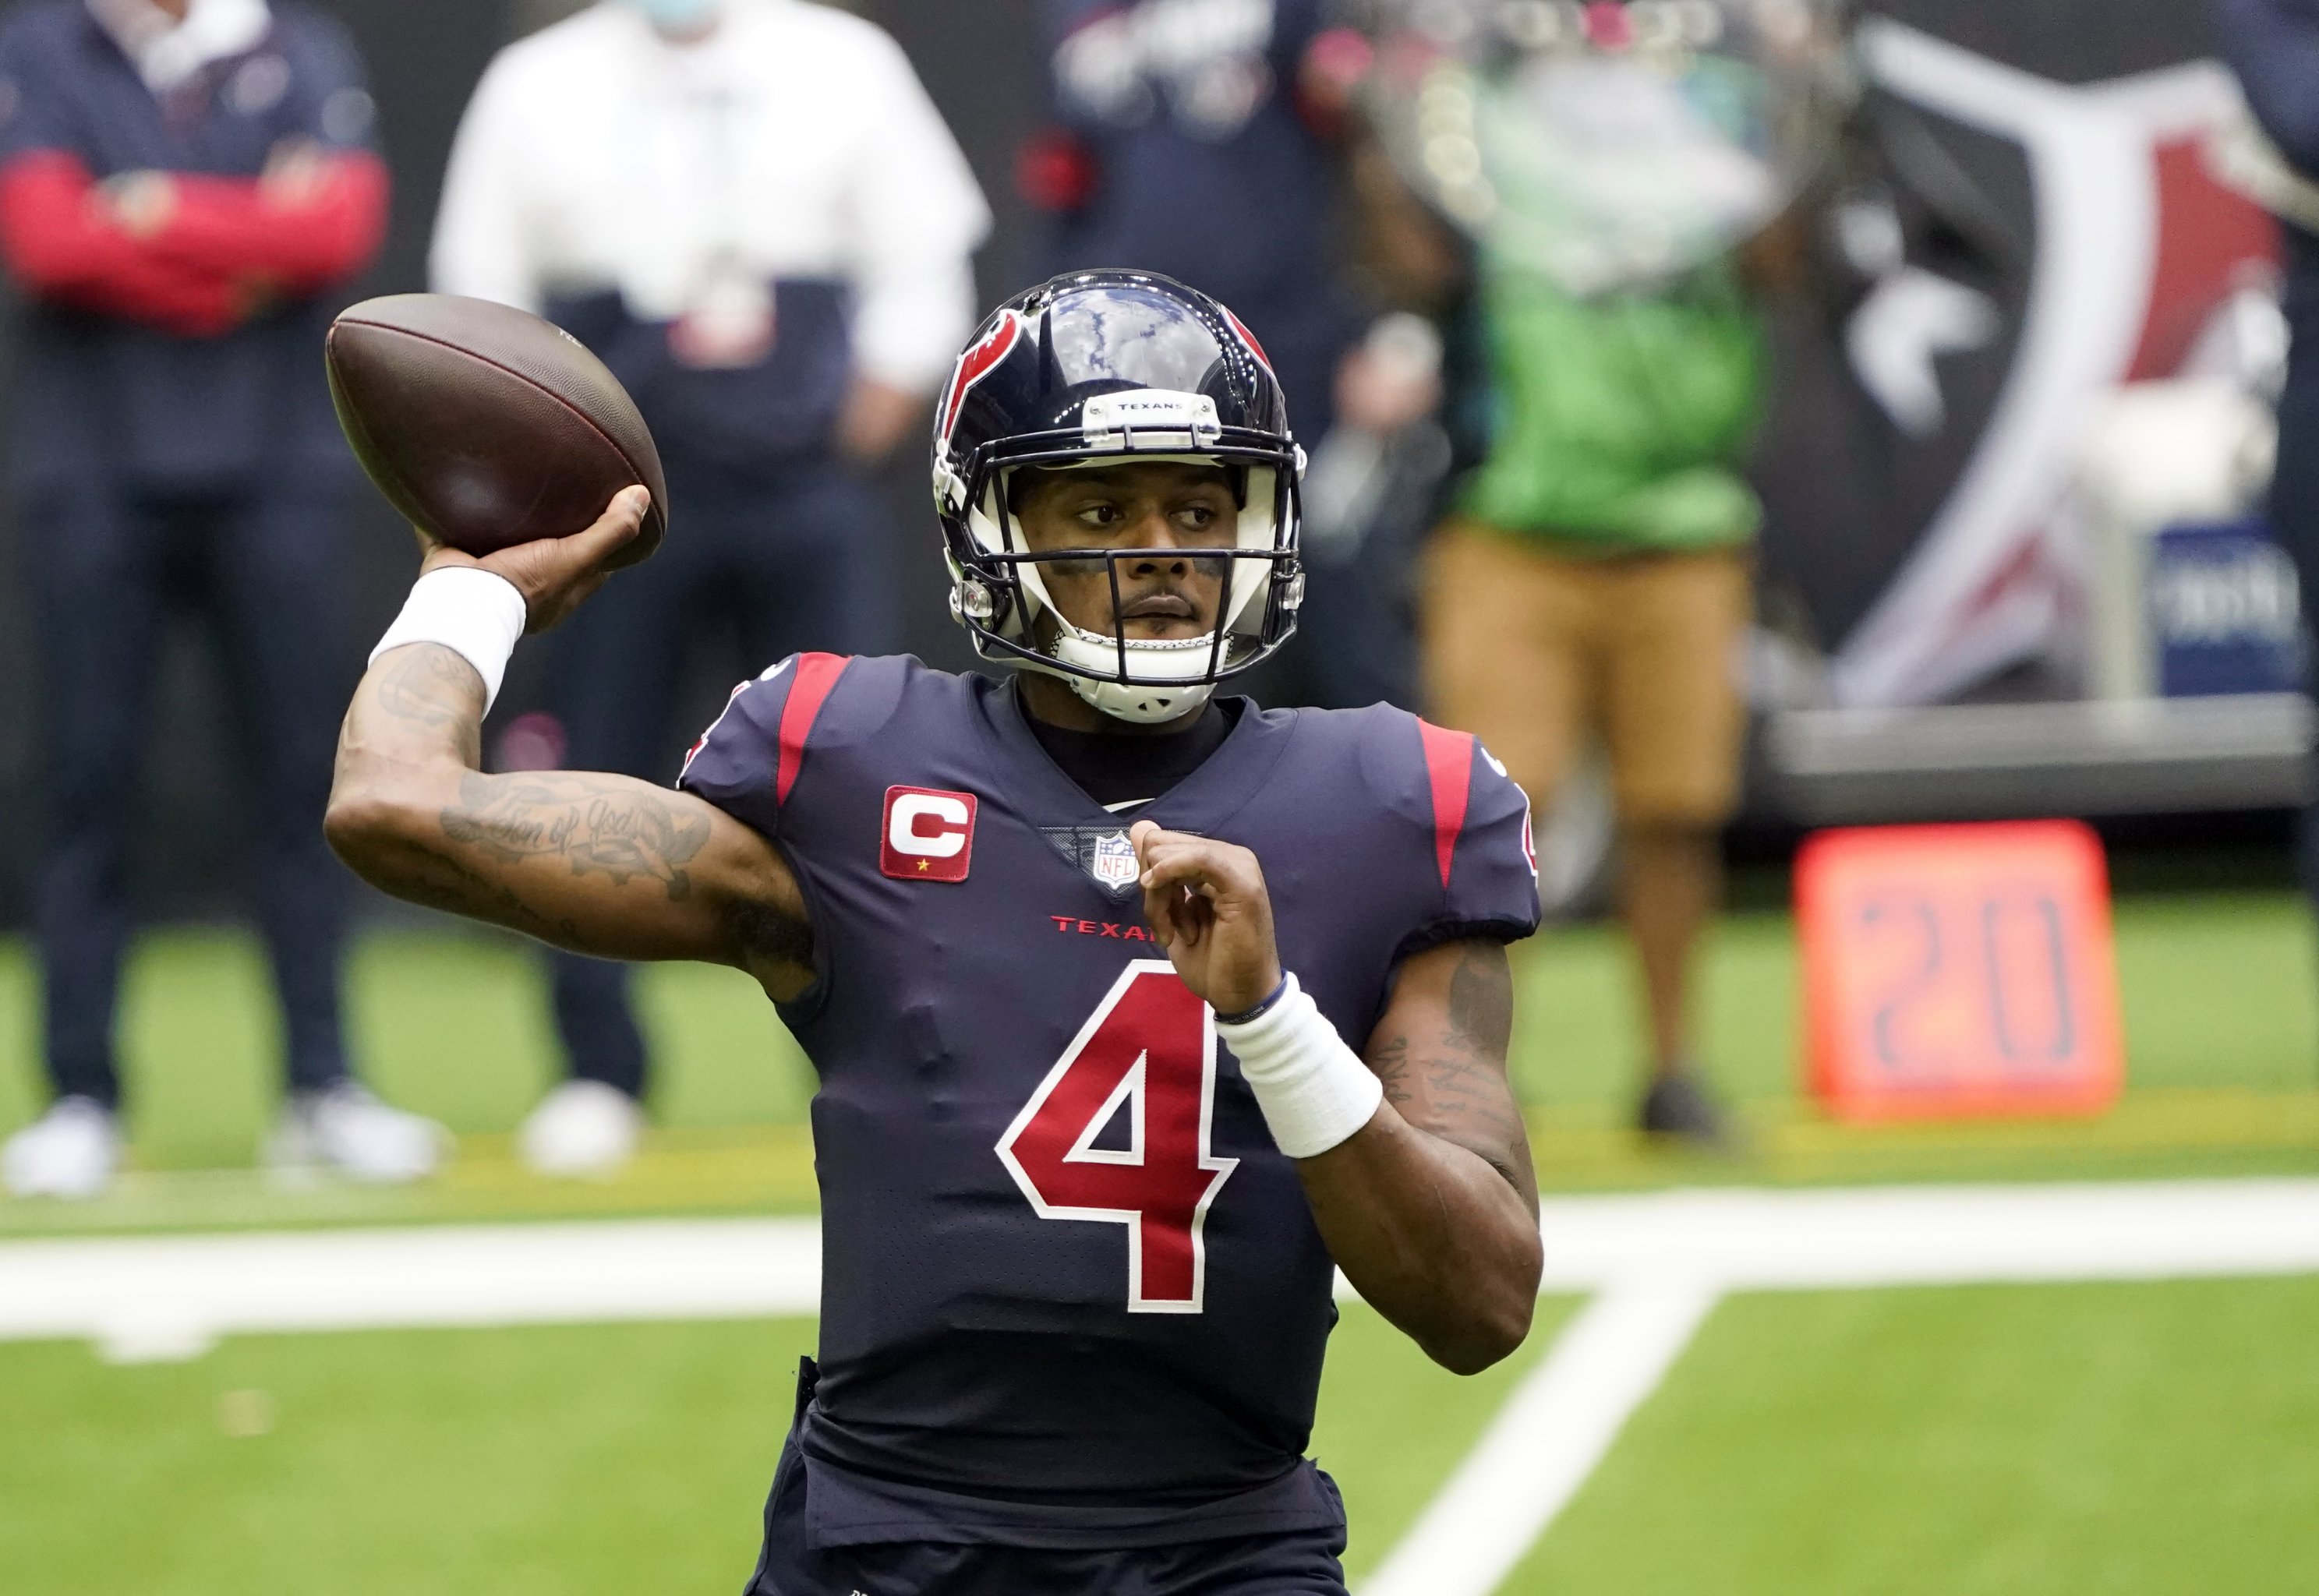 Nfl Rumors Latest Buzz On Possible Deshaun Watson Trade Urban Meyer And More Bleacher Report Latest News Videos And Highlights